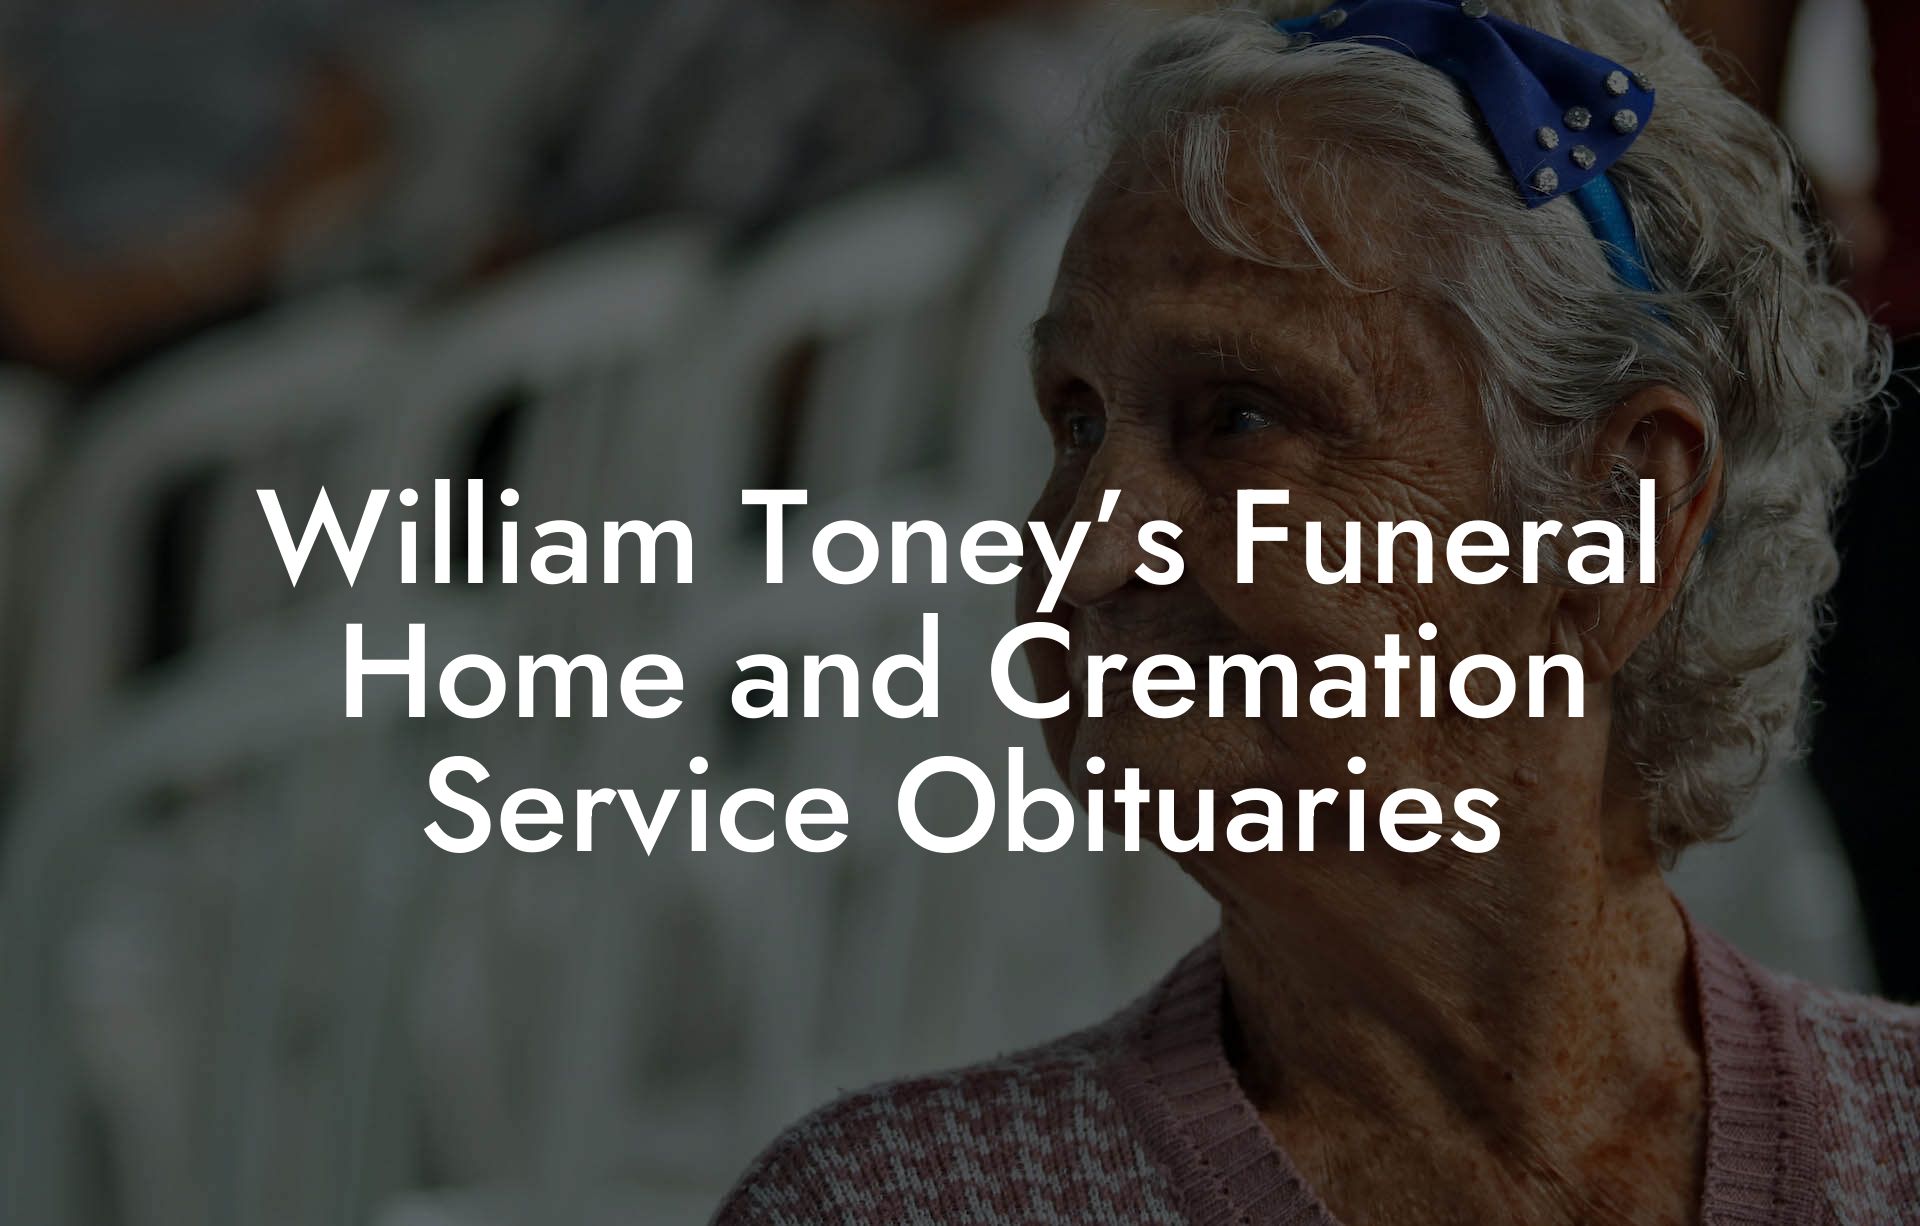 William Toney’s Funeral Home and Cremation Service Obituaries